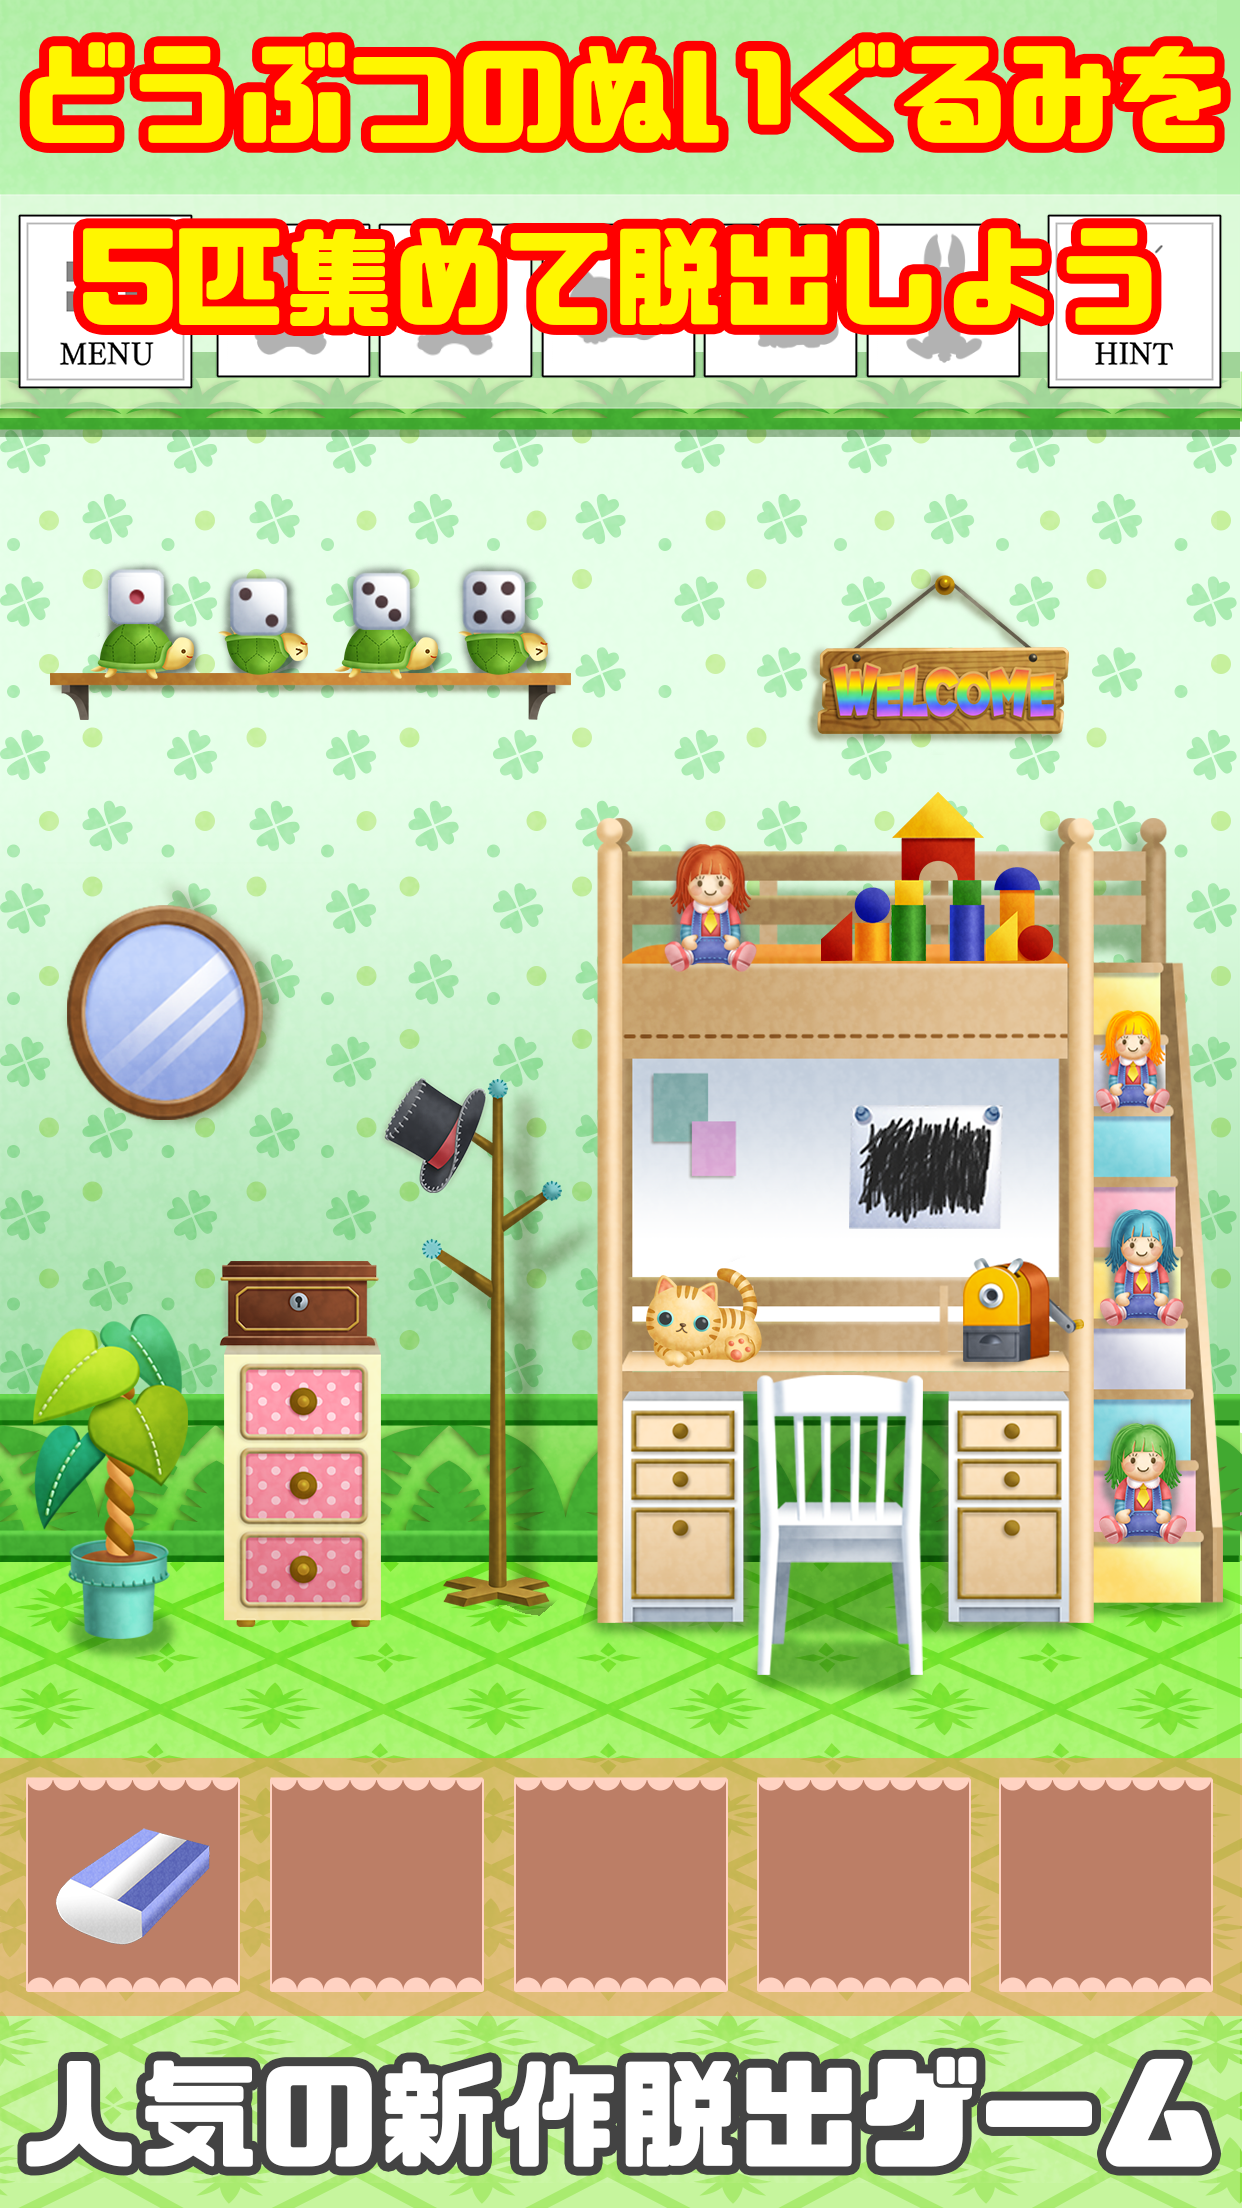 Screenshot 1 of Escape Game -Tower of Stuffed Toys New Popular Animal Escape Edition- 1.0